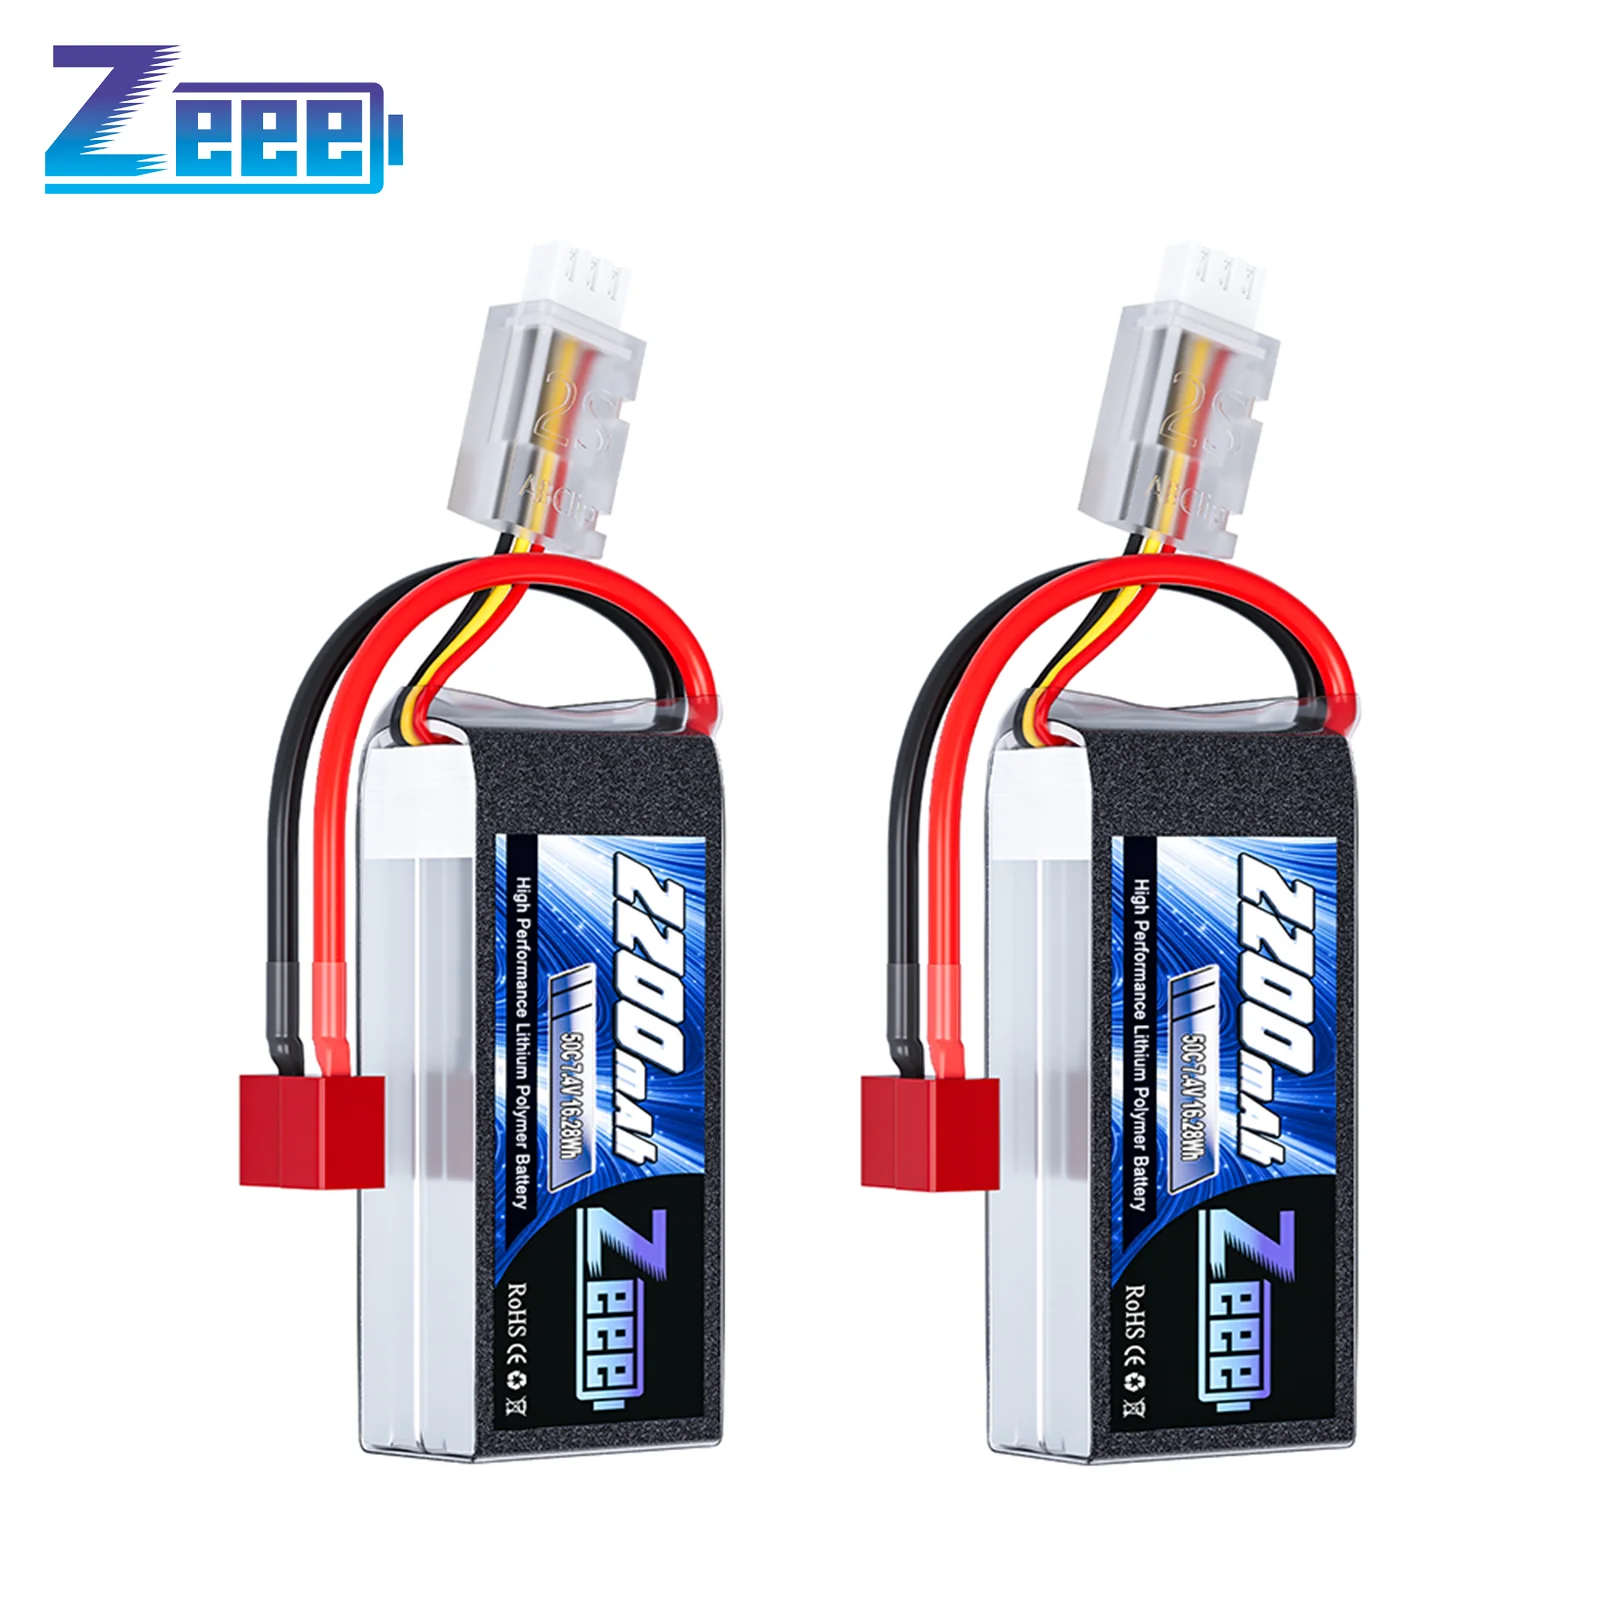 

Zeee 2S 2200mAh Shorty RC Lipo Battery 7.4V 50C T/XT60 Plug Softcase RC Car Truck Buggy FPV Drone Helicopter Airplane RC Parts